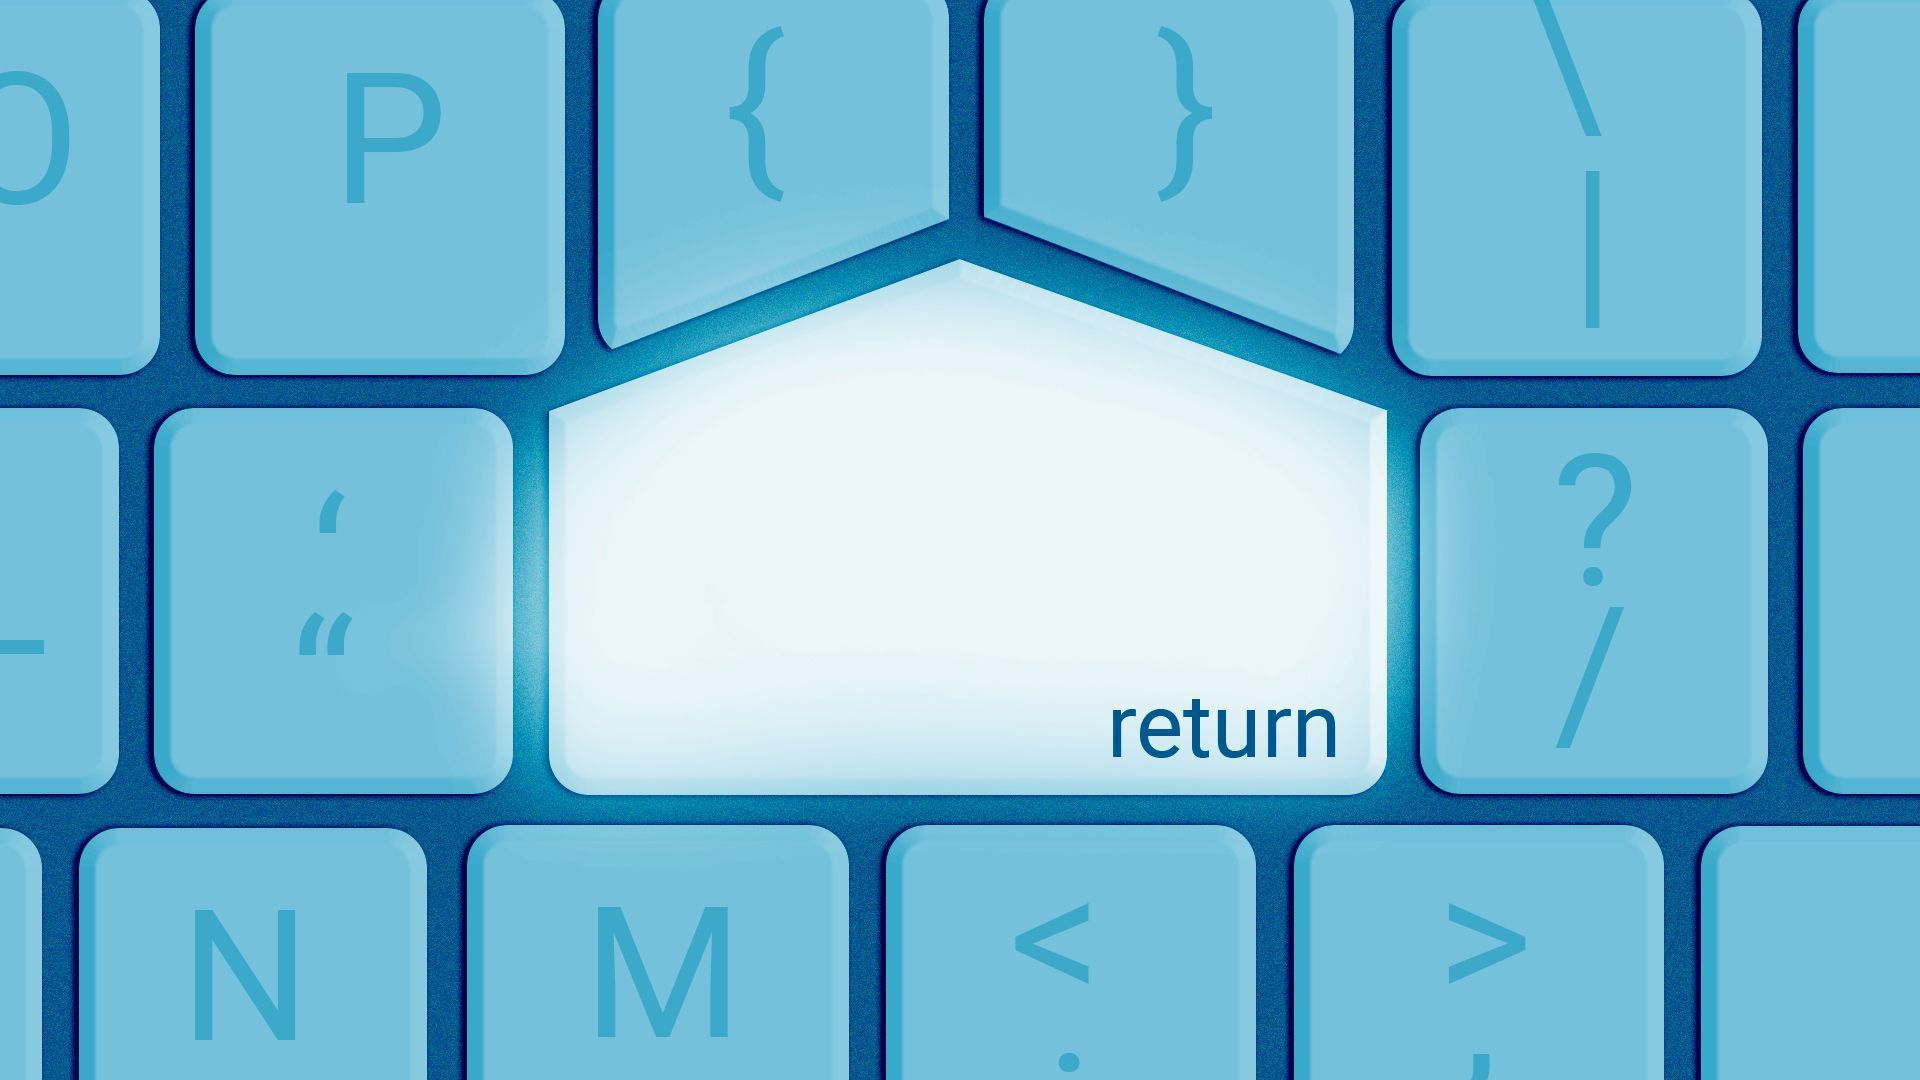 Illustration of a computer keyboard with the return key in the shape of a house.